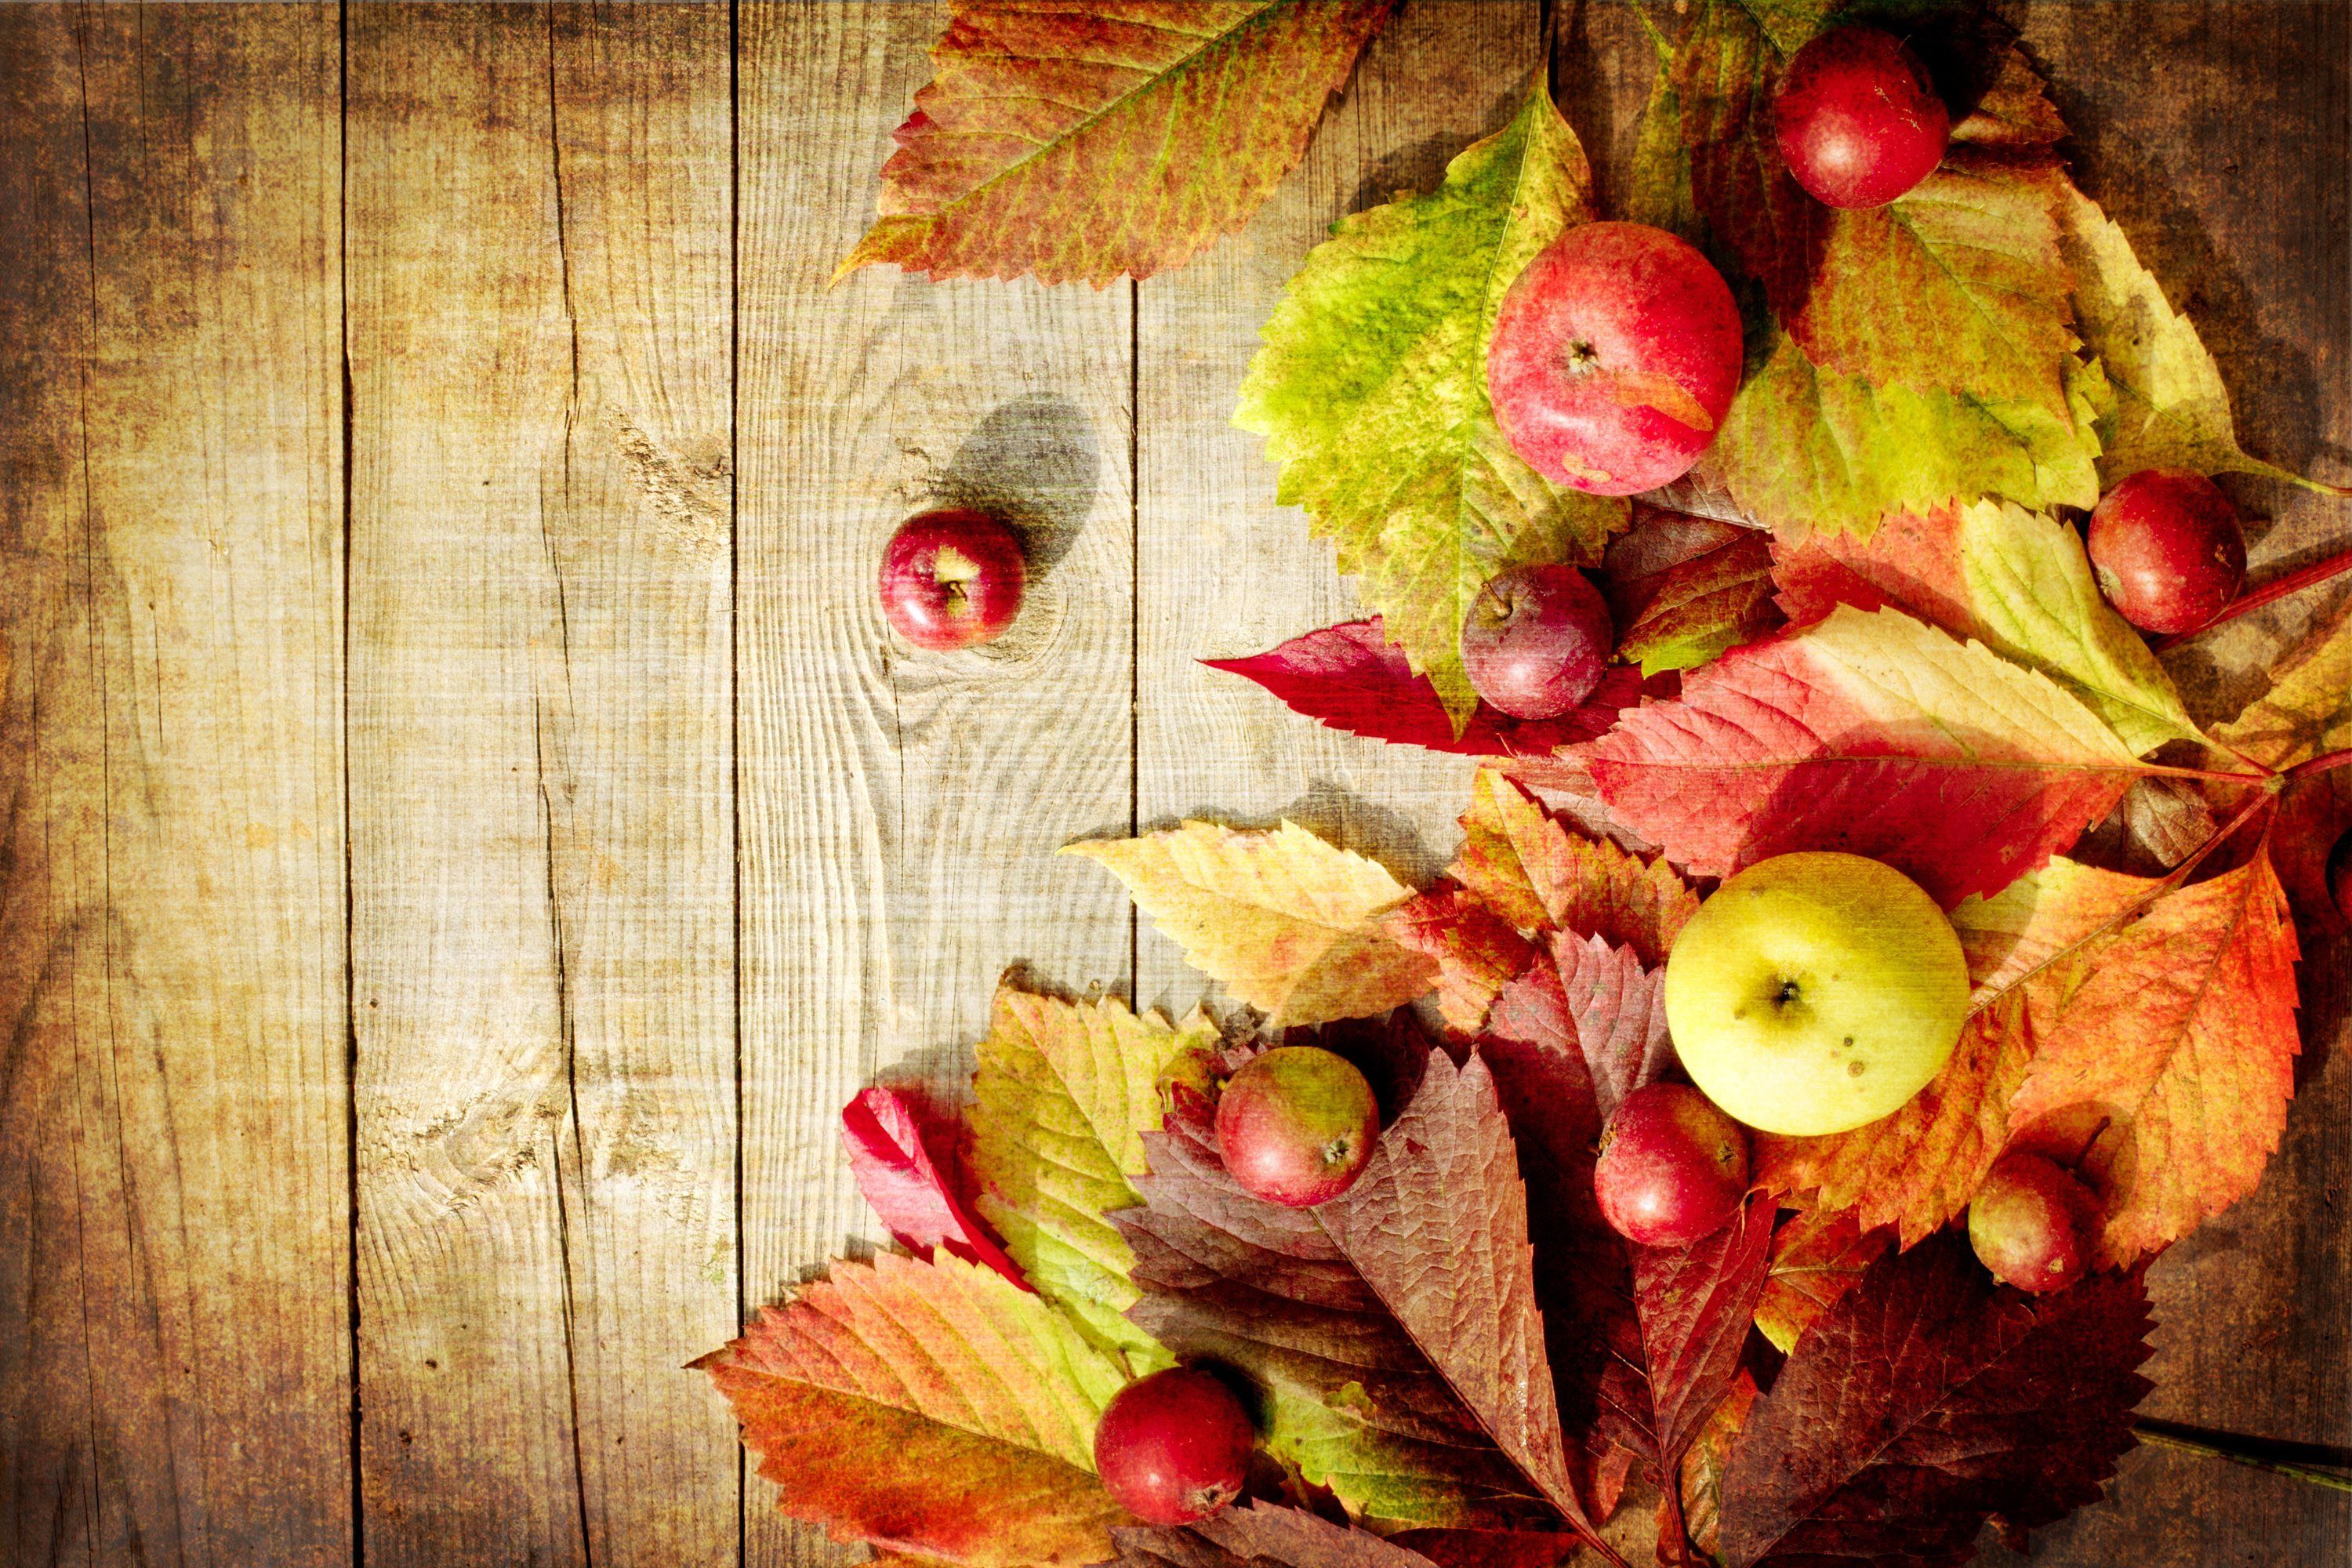 Download wallpaper nature, autumn, leaves, fruits, fruit, apples, board for desktop with resolution 3000x2000. High Quality HD picture wallpaper